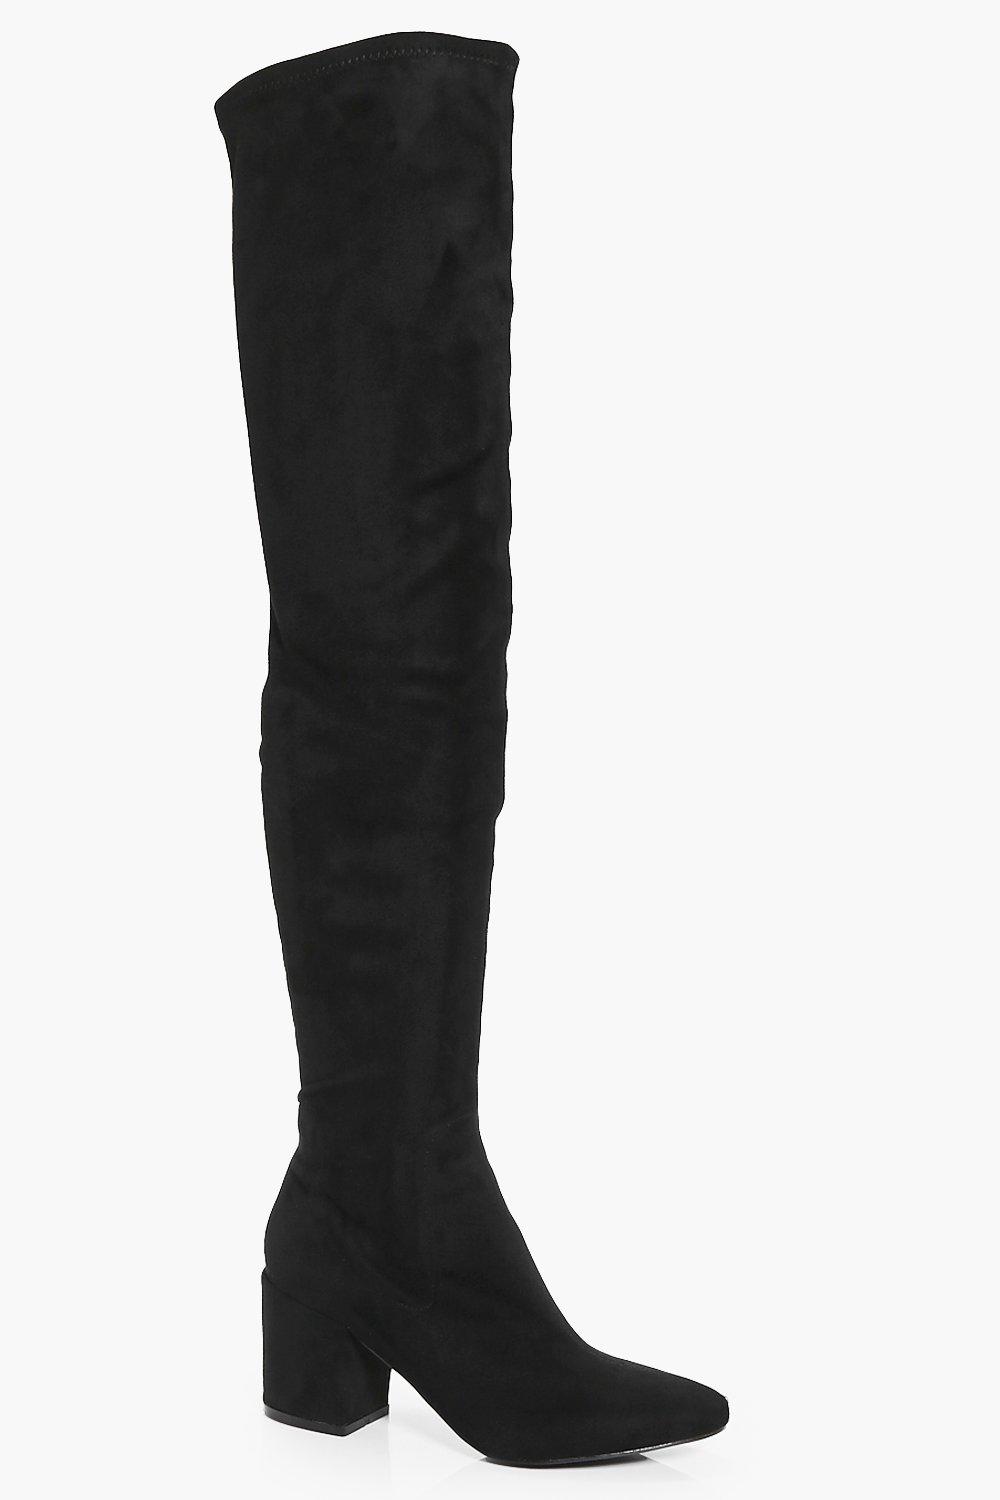 15 Must-Have Outfits With Black Thigh High Boots - Society19